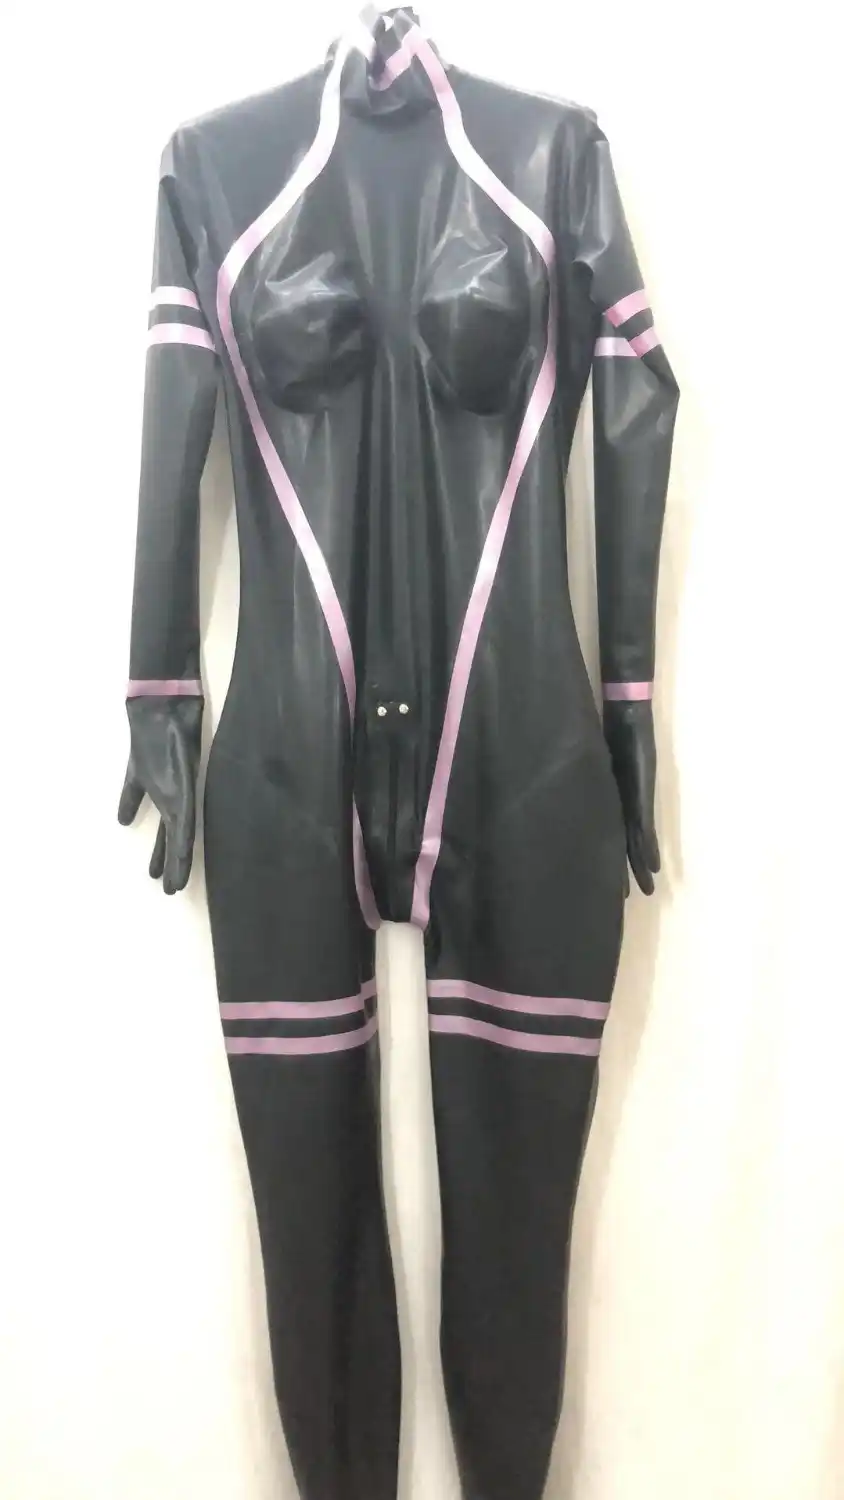 Kawaii reccomend dressing layers latex catsuits putting zipping